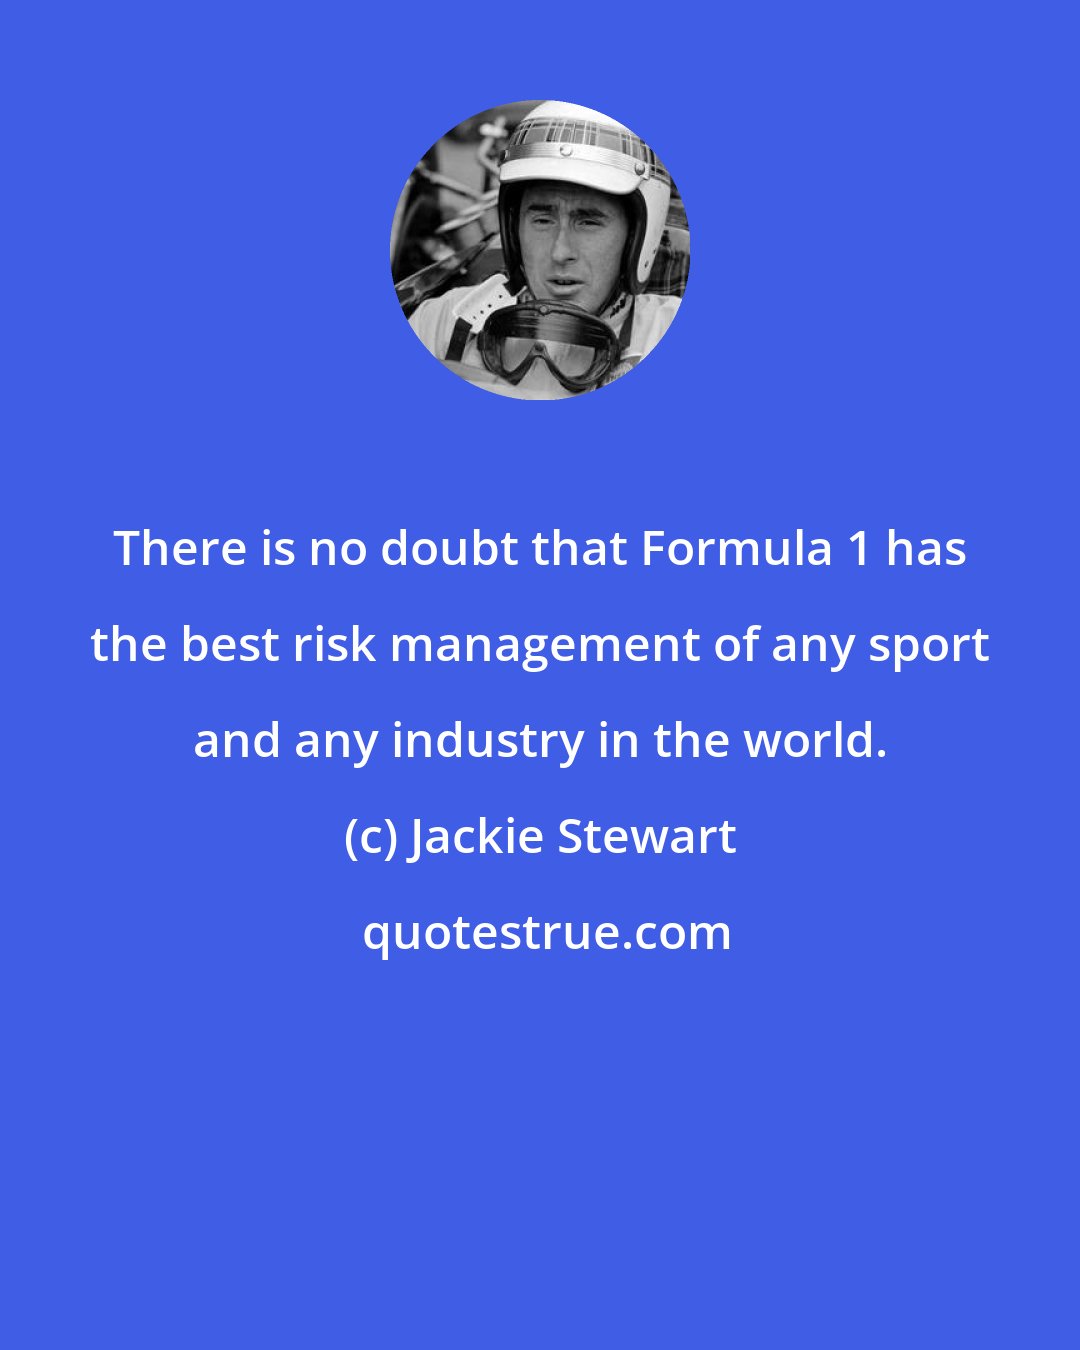 Jackie Stewart: There is no doubt that Formula 1 has the best risk management of any sport and any industry in the world.